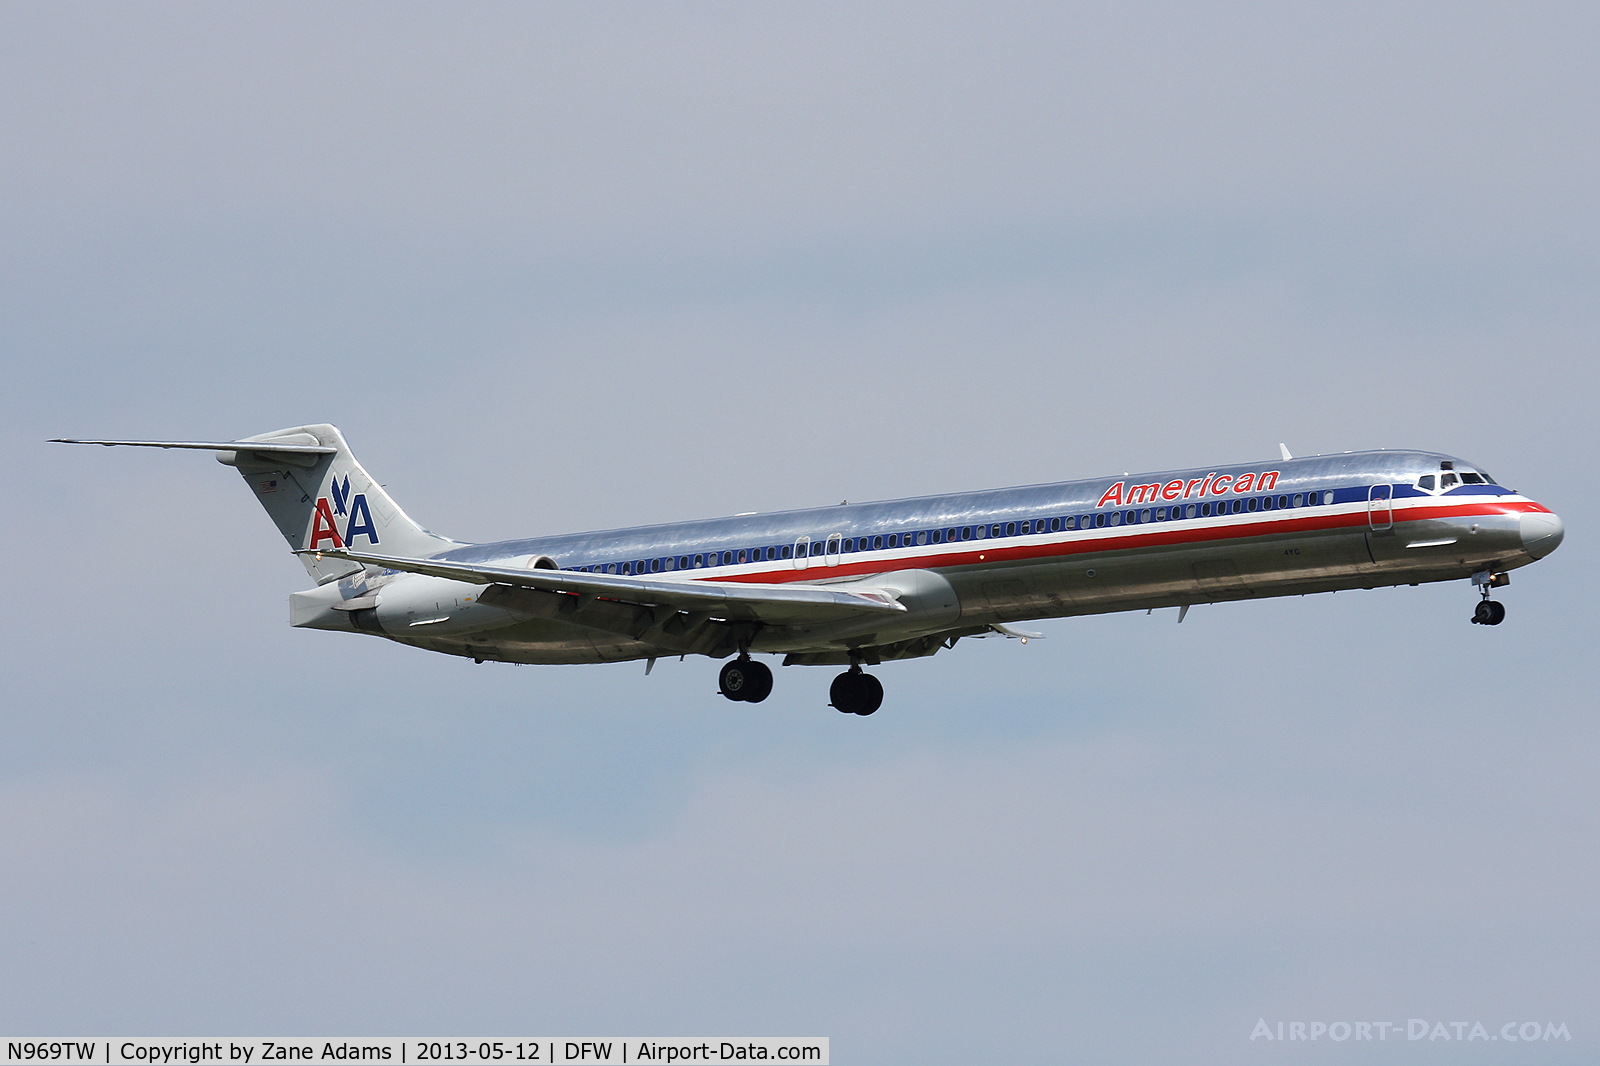 N969TW, 1999 McDonnell Douglas MD-83 (DC-9-83) C/N 53619, American Airlines at DFW Airport